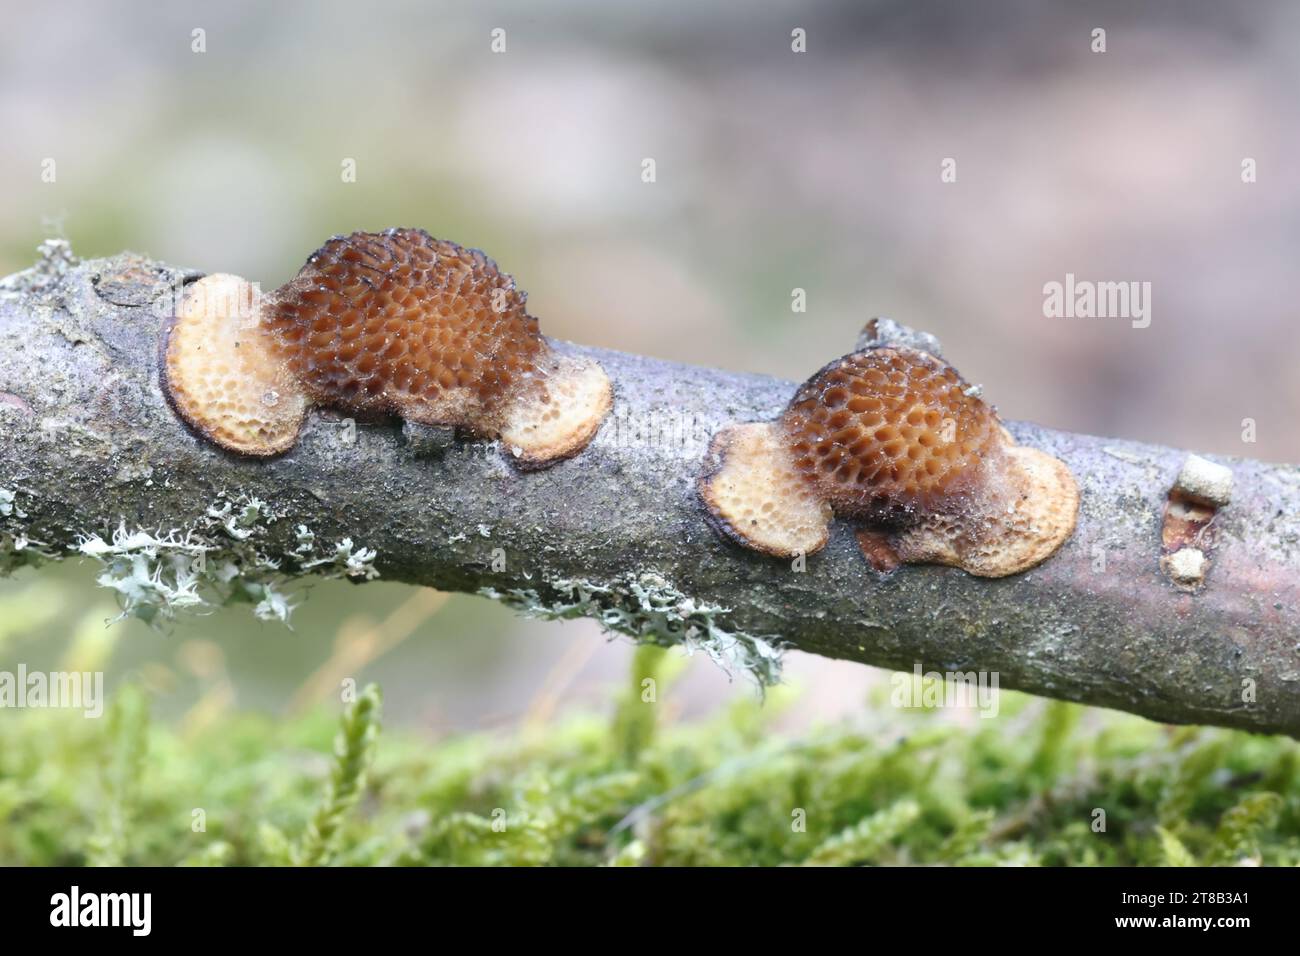 Dichomitus campestris, also called Polyporus campestris, commonly known as Hazel porecrust, wild bracket fungus from Finland Stock Photo